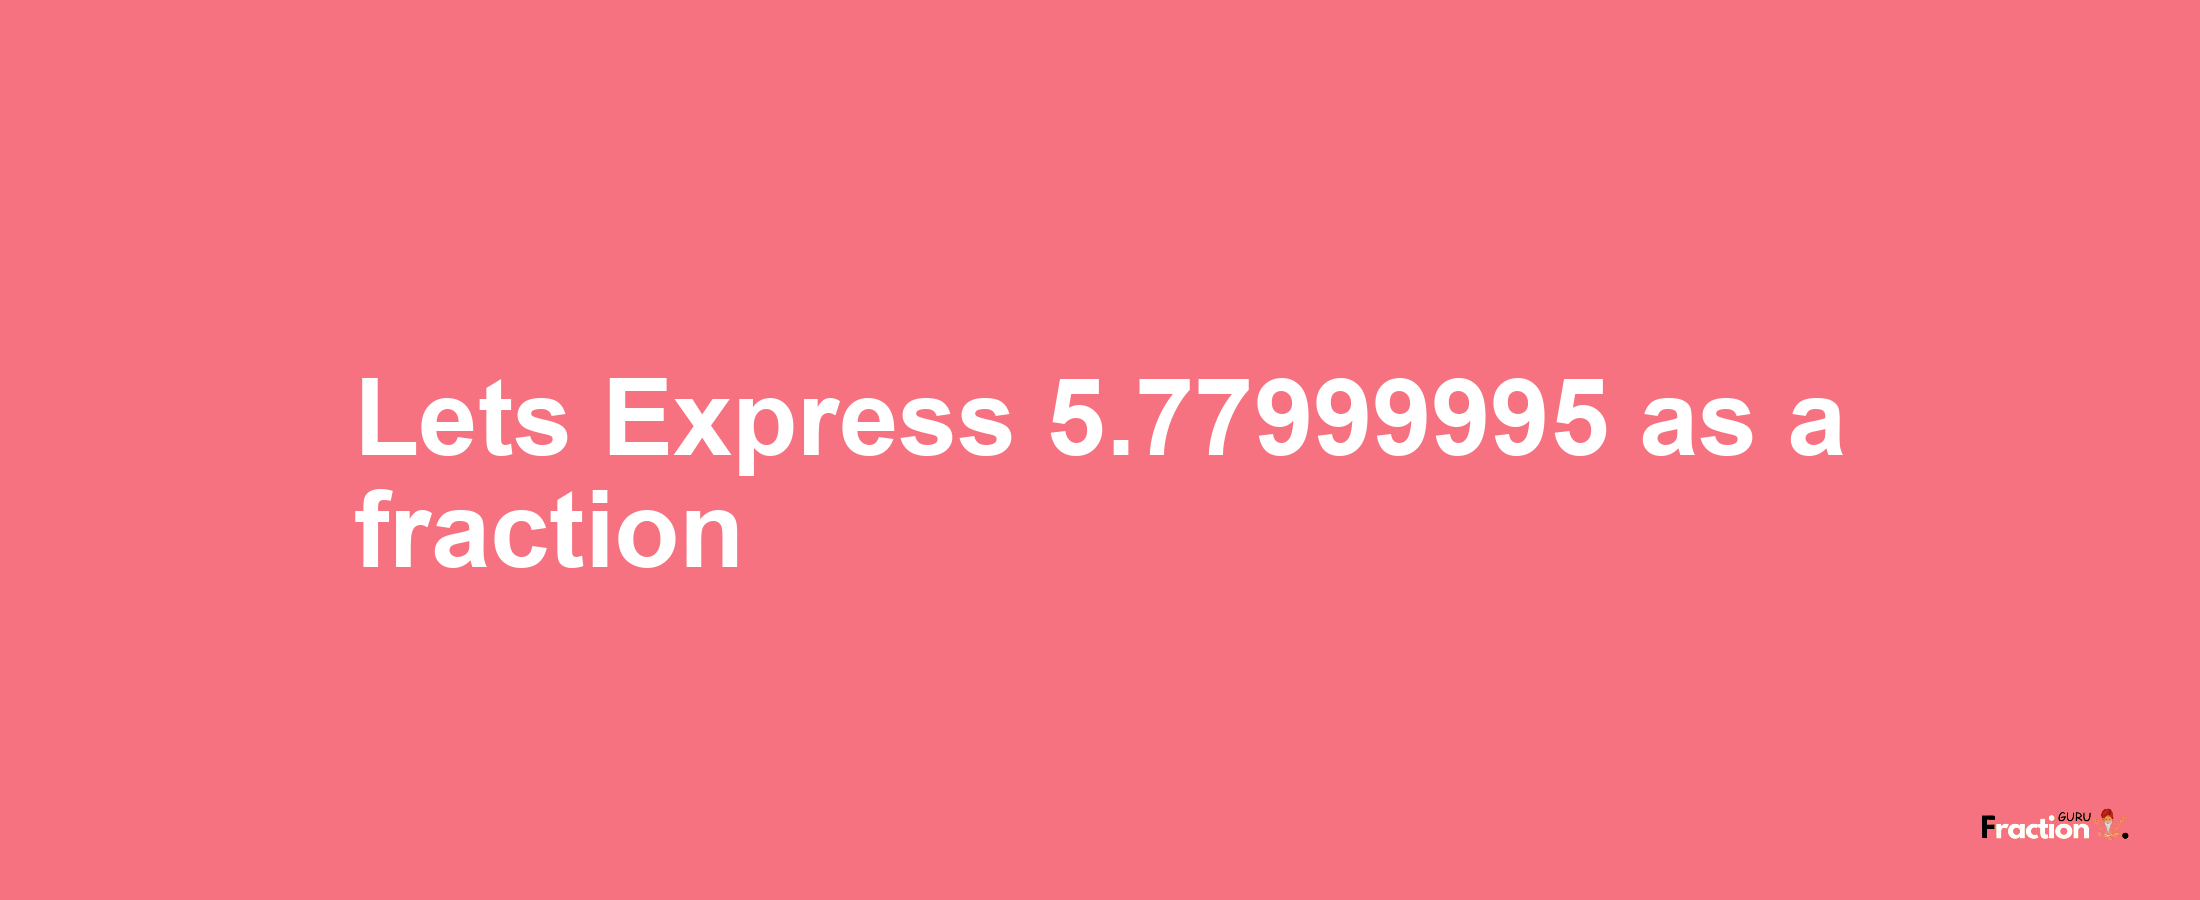 Lets Express 5.77999995 as afraction